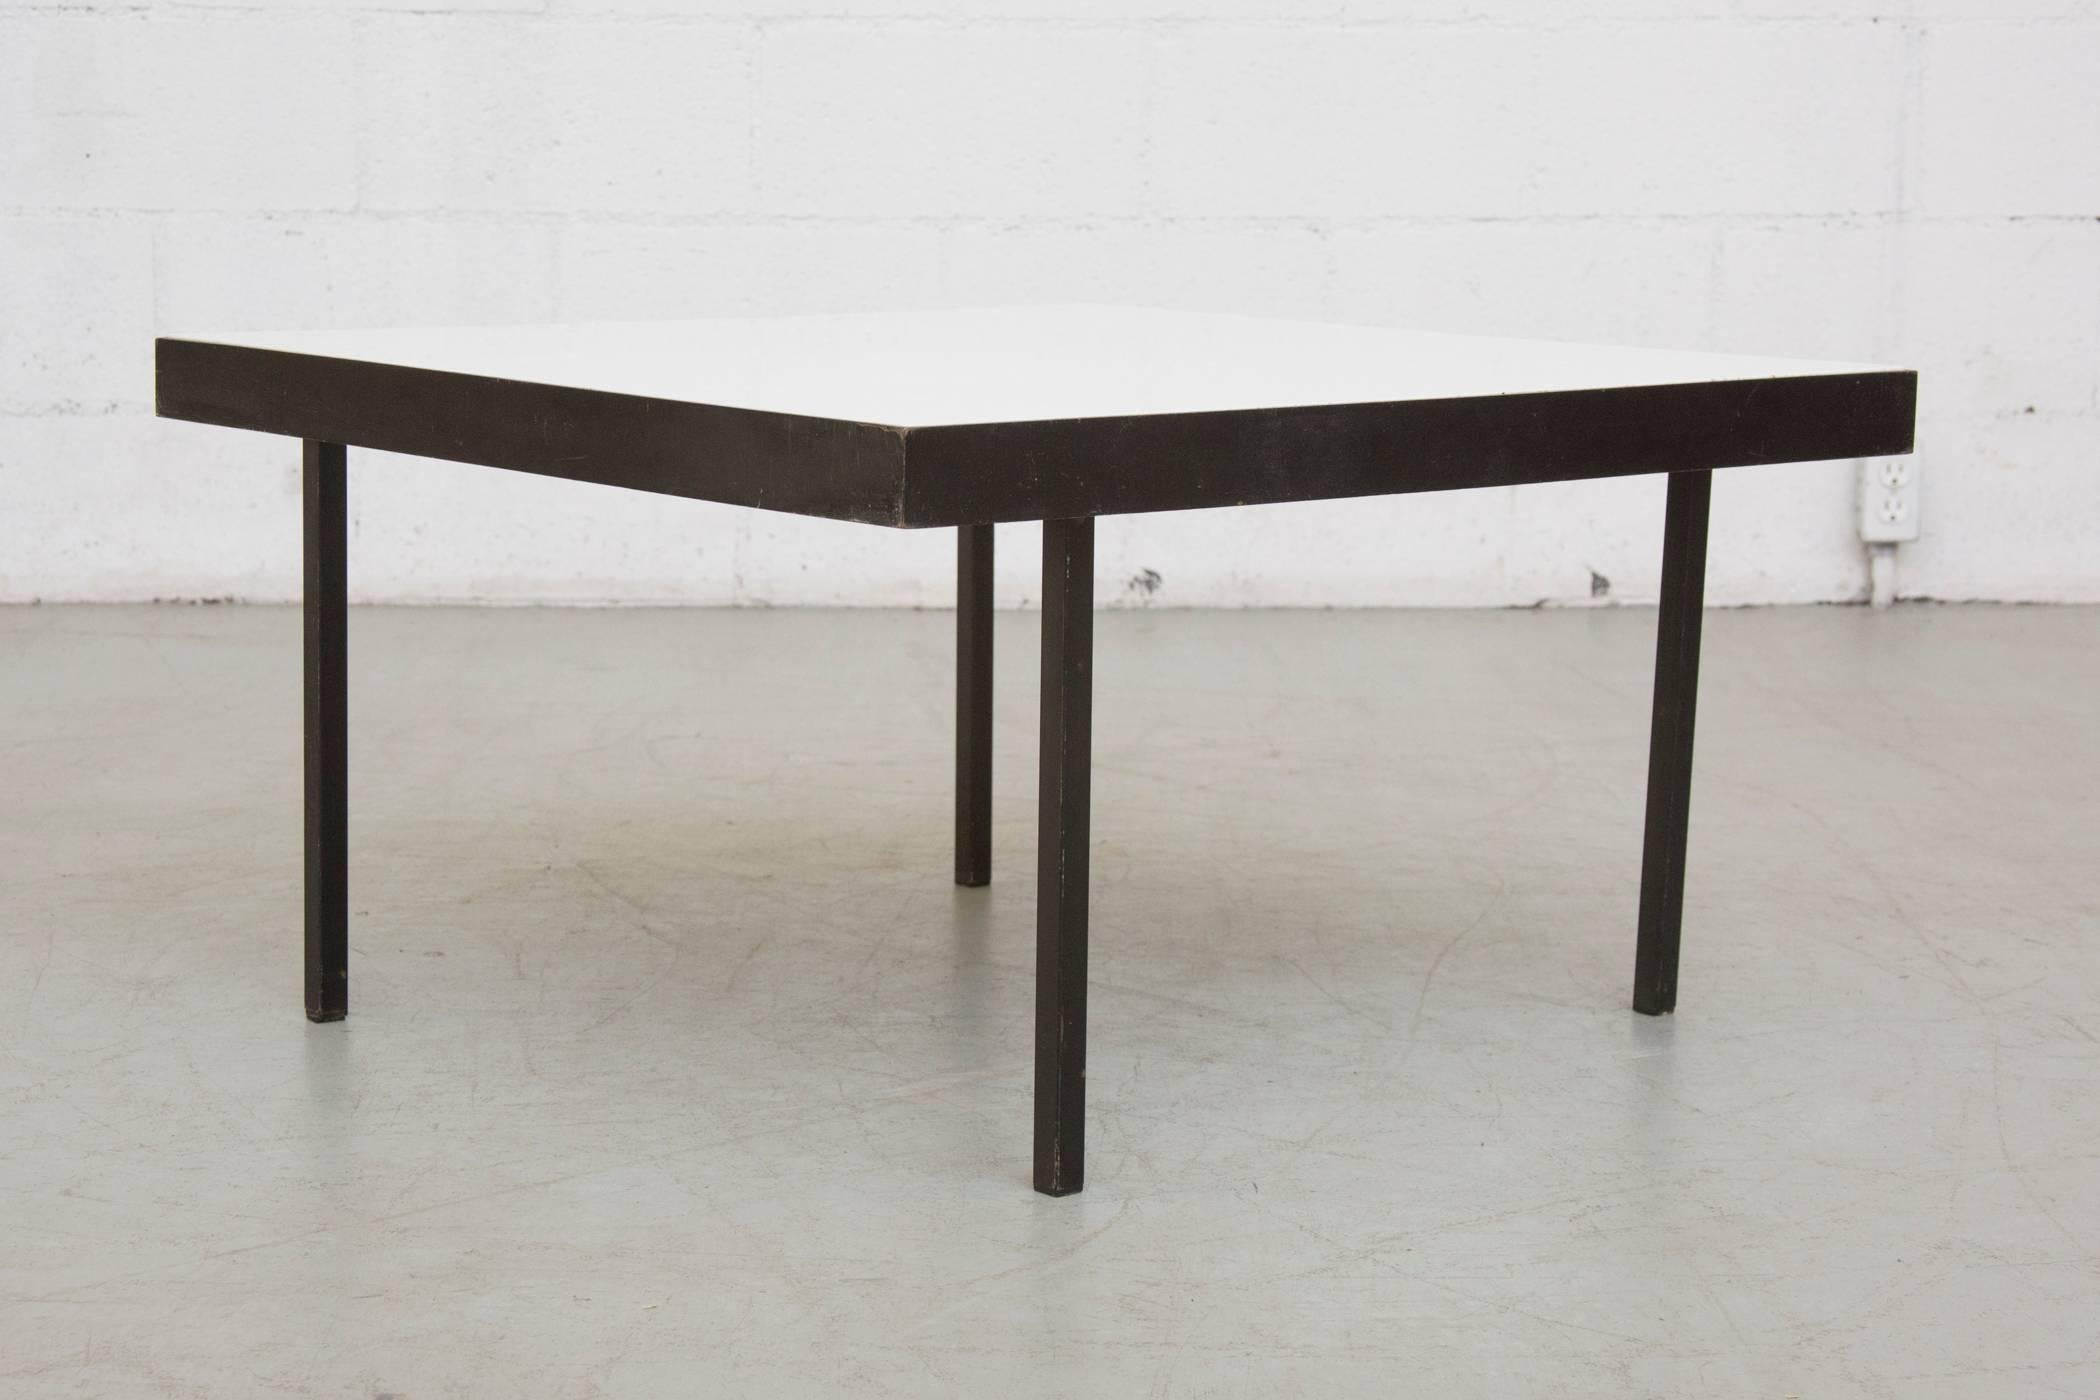 Minimal black enameled framed coffee table with original opaque white glass top and offset legs. In the style of Janni Van pelt. In original condition with wear consistent with age and use.